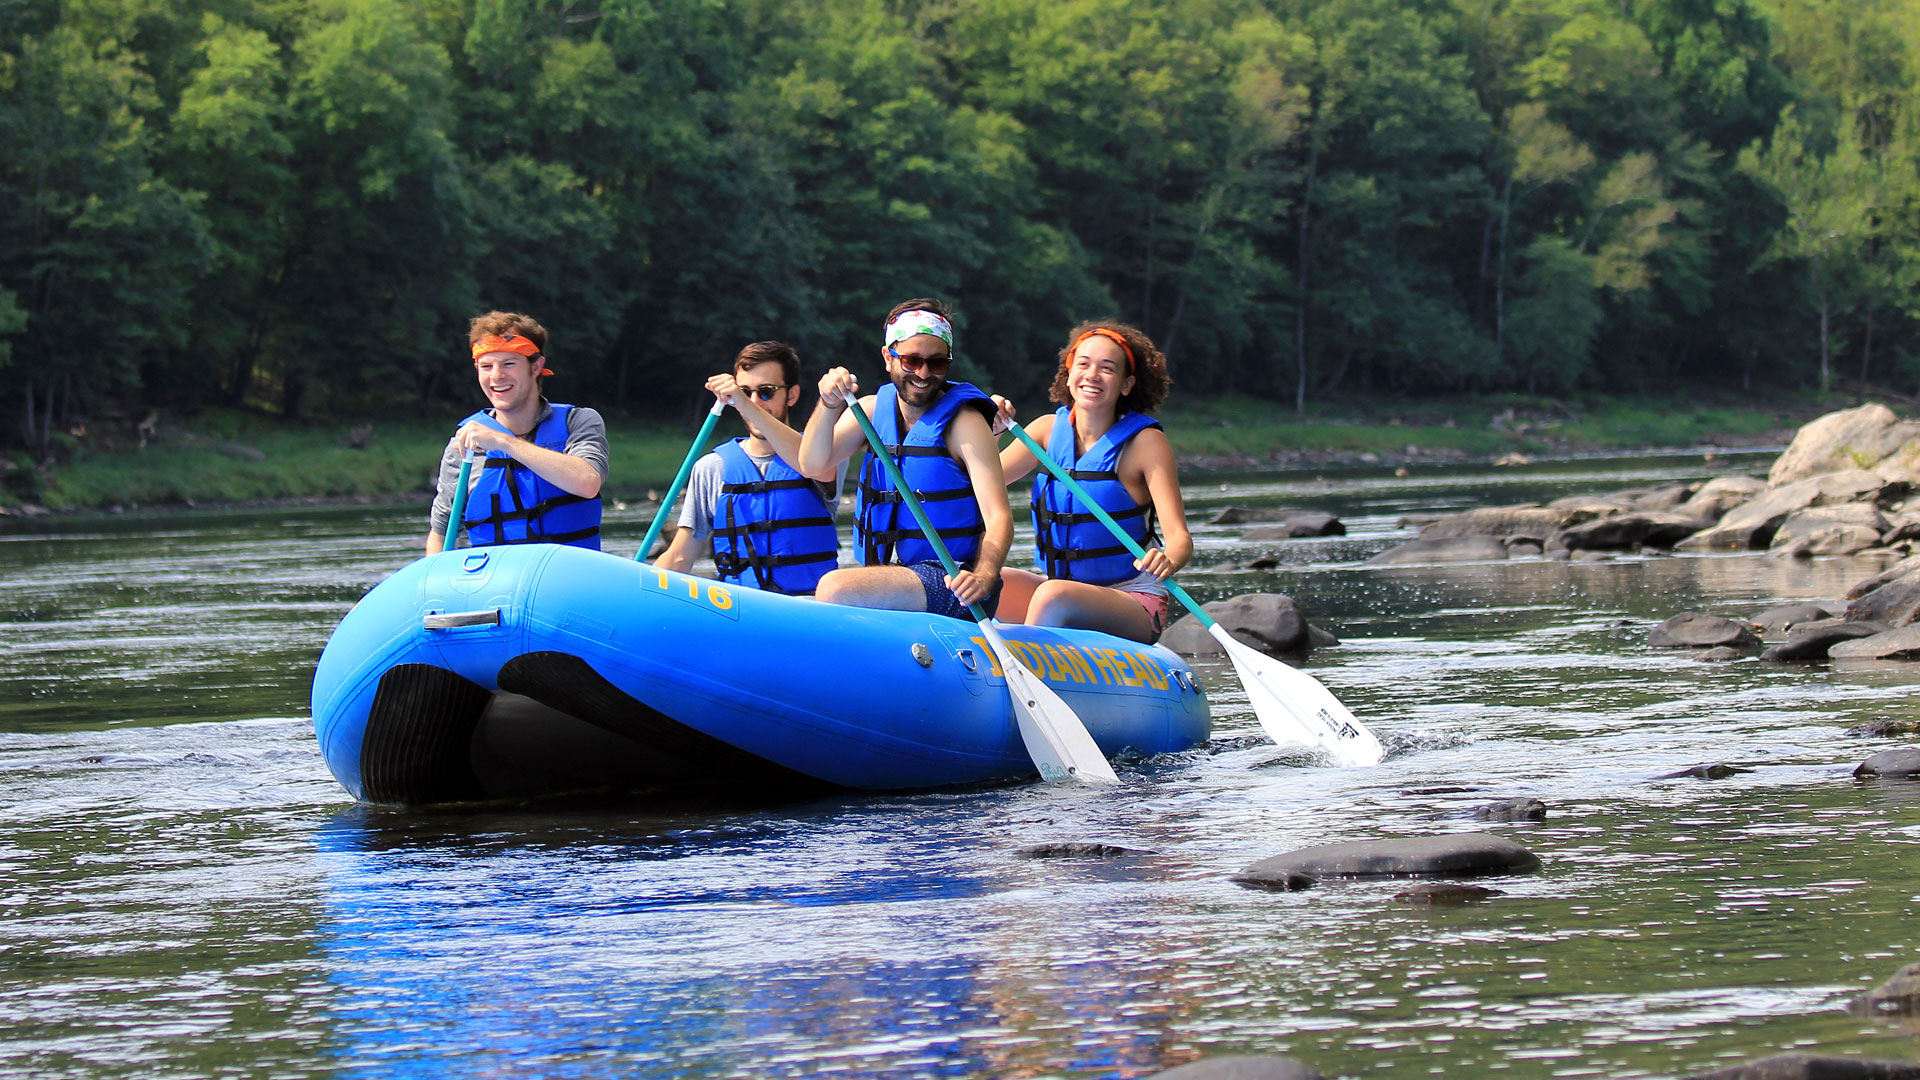 group of four in raft on the Delaware River - Indian Head Canoeing, Rafting, Kayaking, and Tubing on the Delaware River